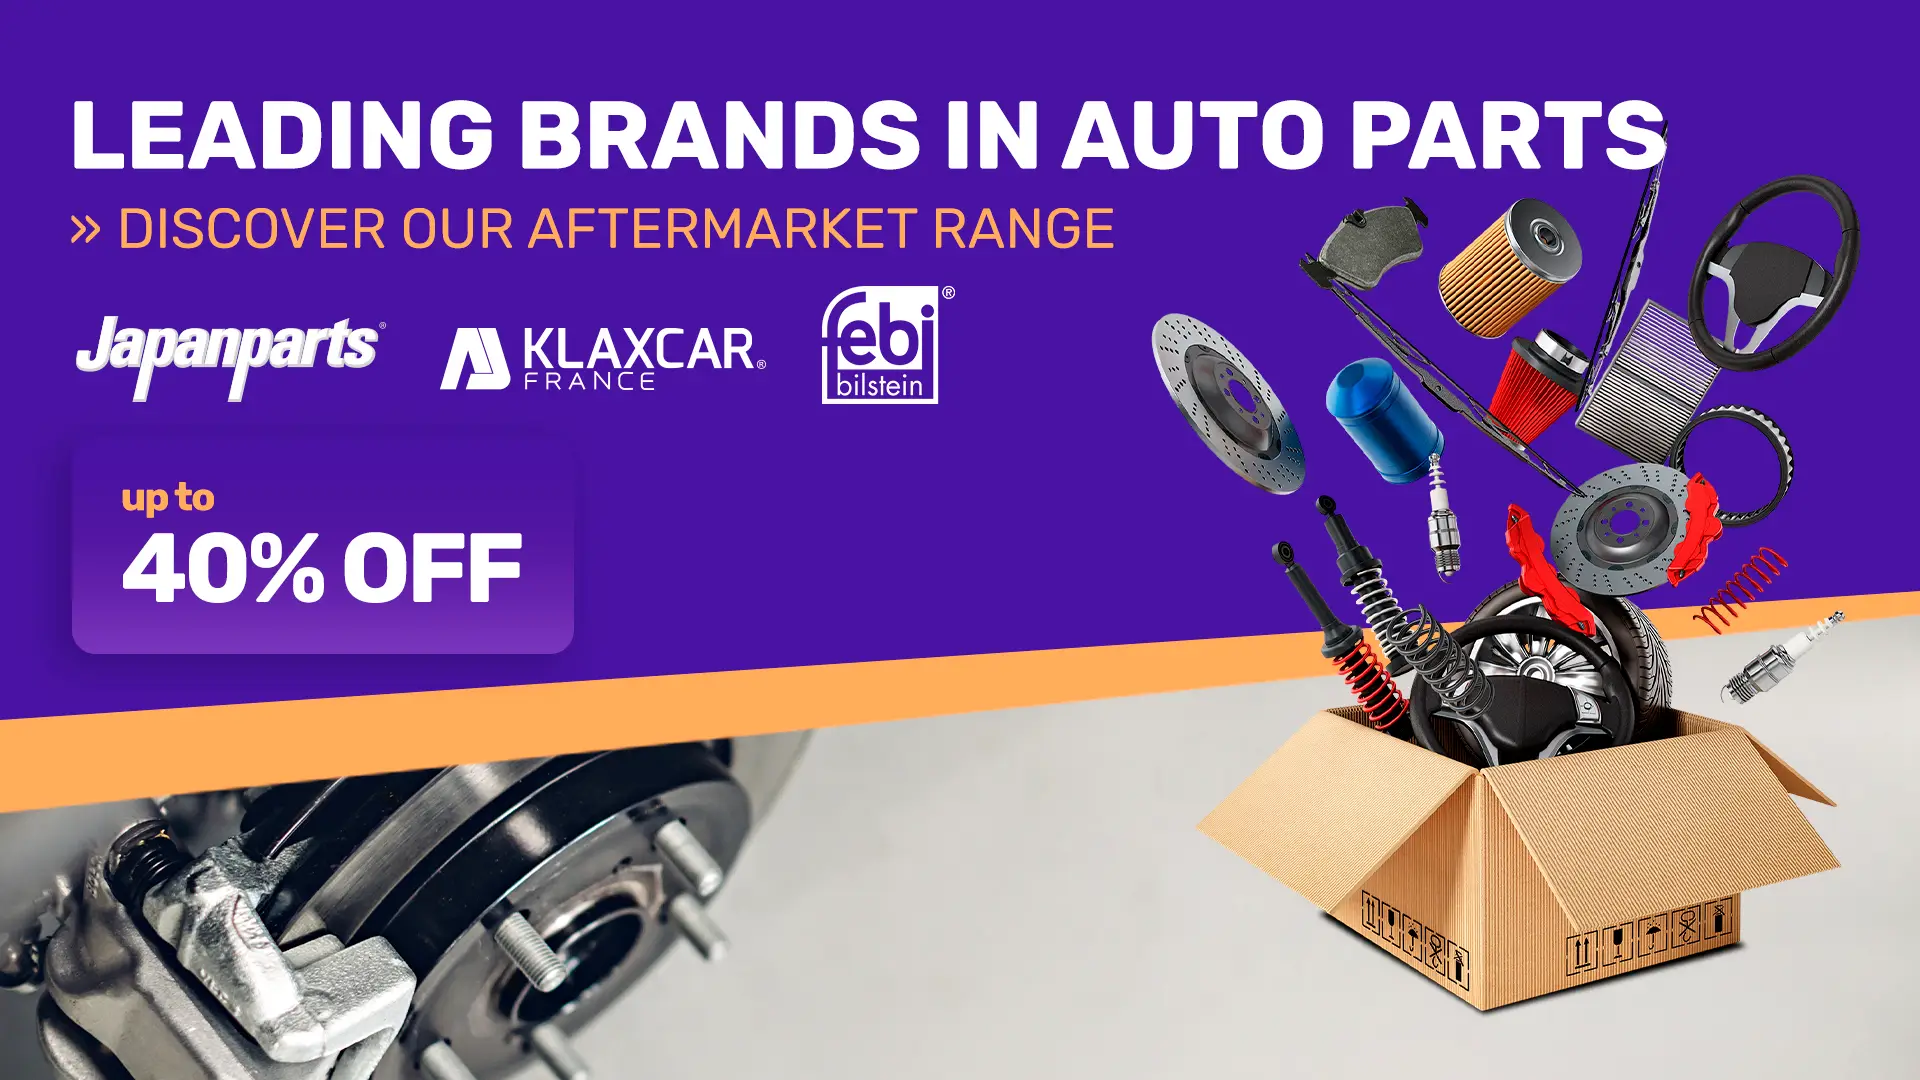 UP TO 40% OFF ON AFTERMARKET